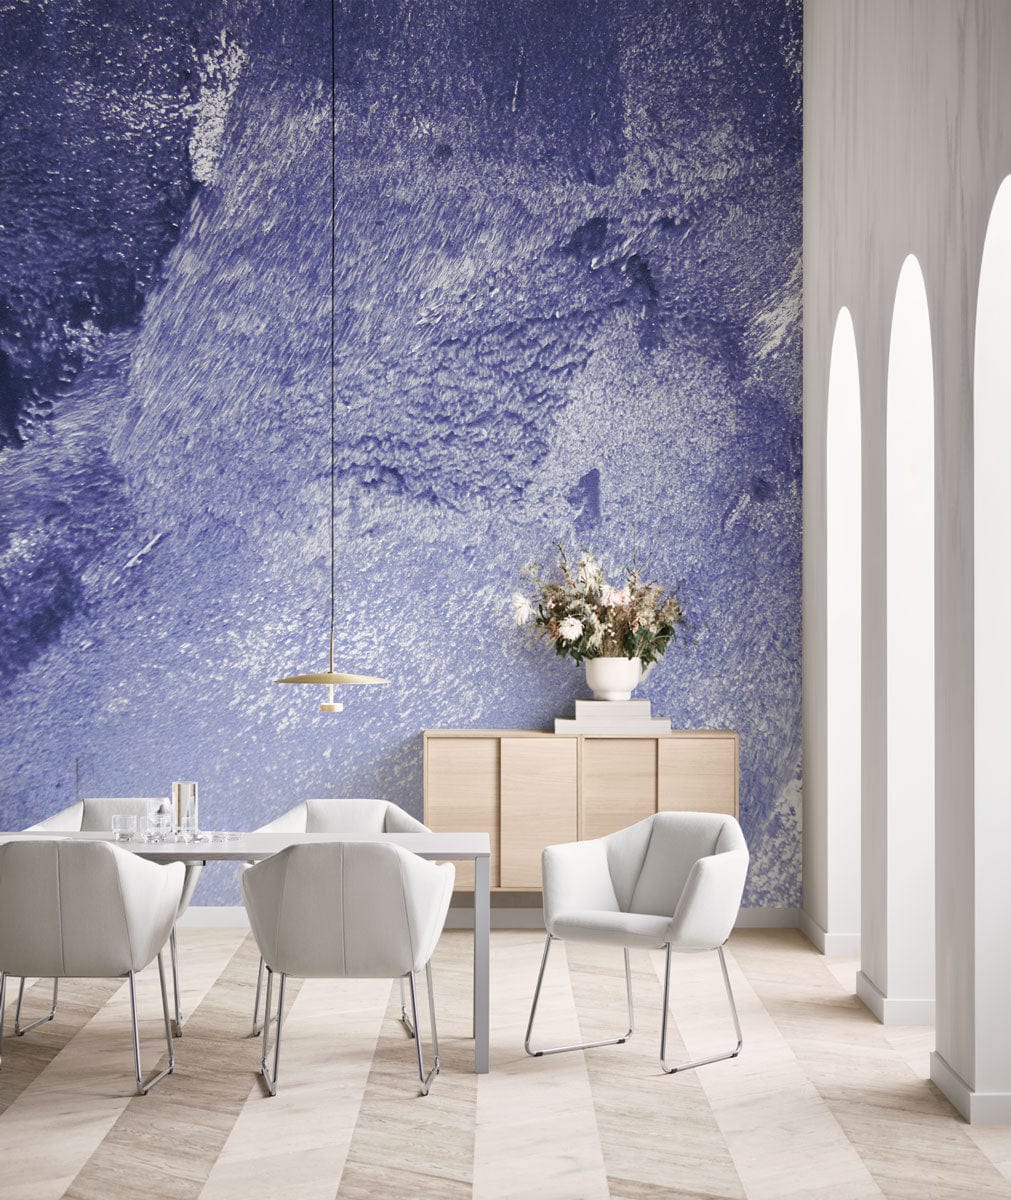 Mural with Old Purple Paint on the Wall as a Decoration for the Dining Room